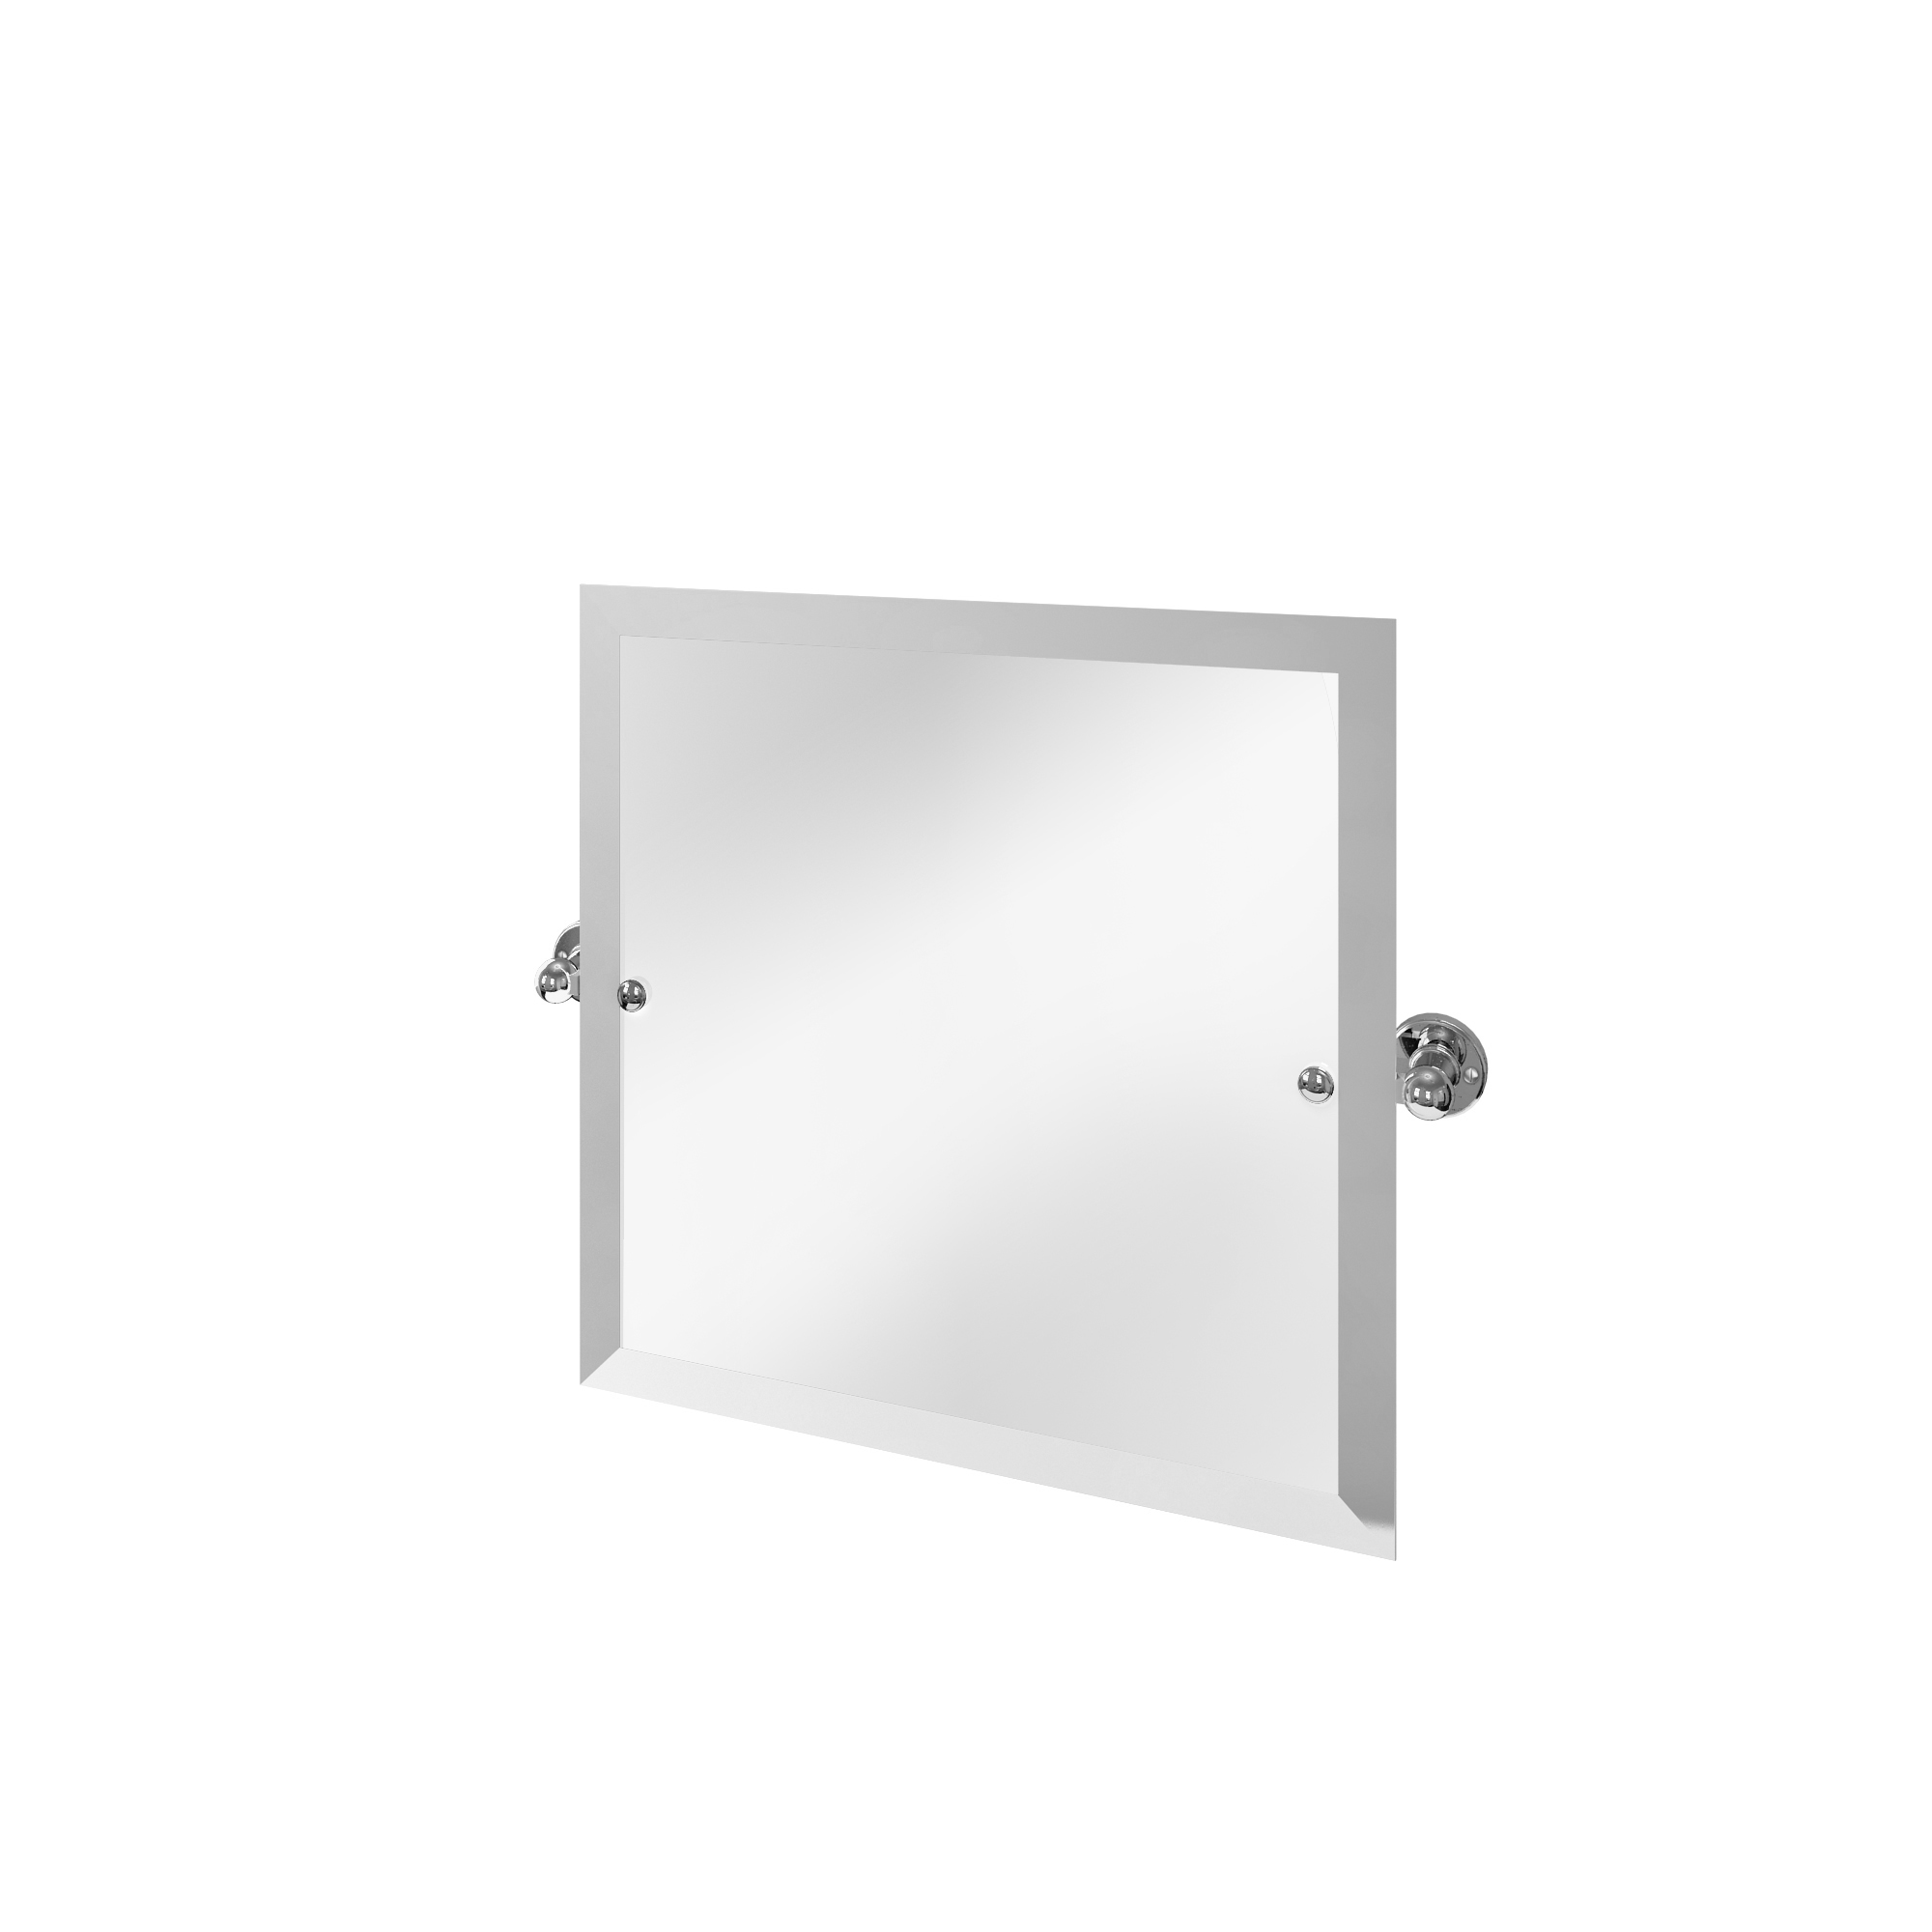 Arcade Square swivel mirror-chrome plated with brass wall mounts - chrome